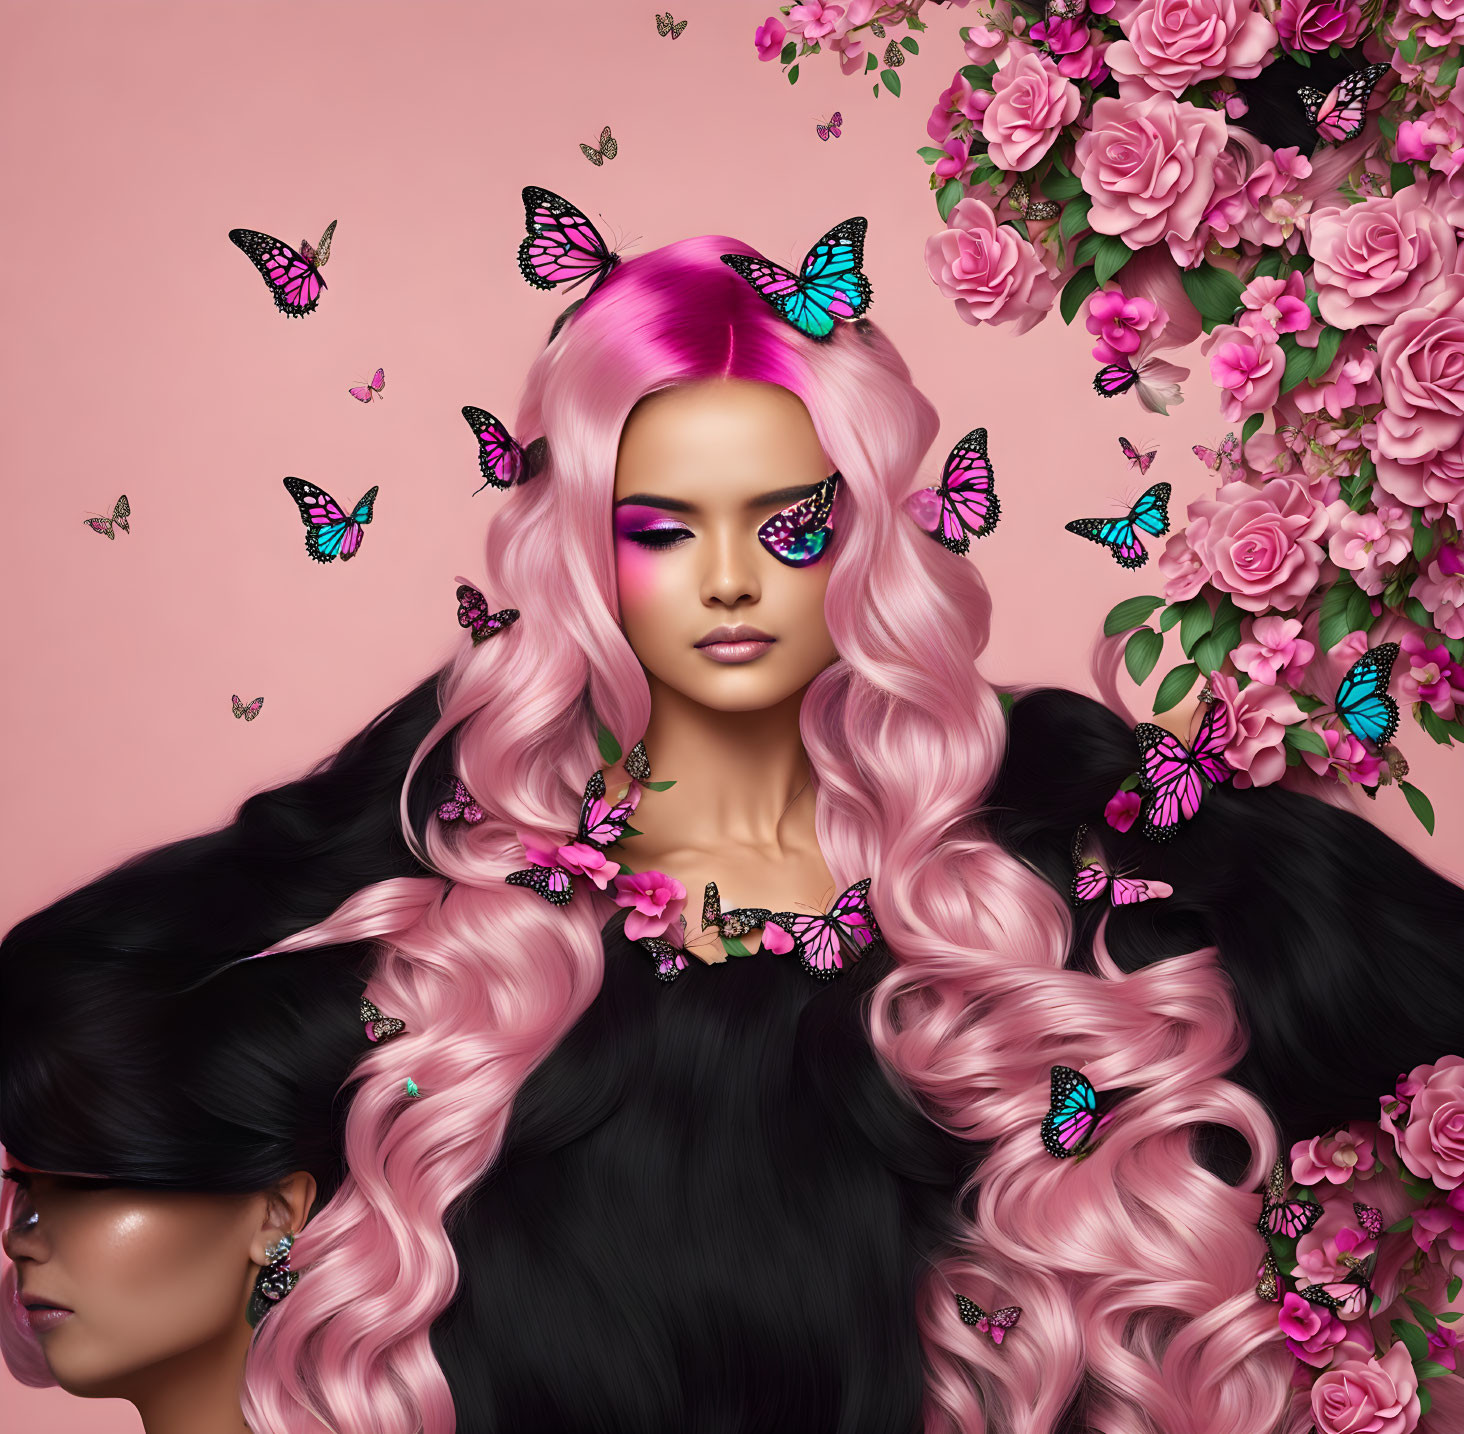 Digital artwork: Person with long pink hair, butterflies, and roses on pink background